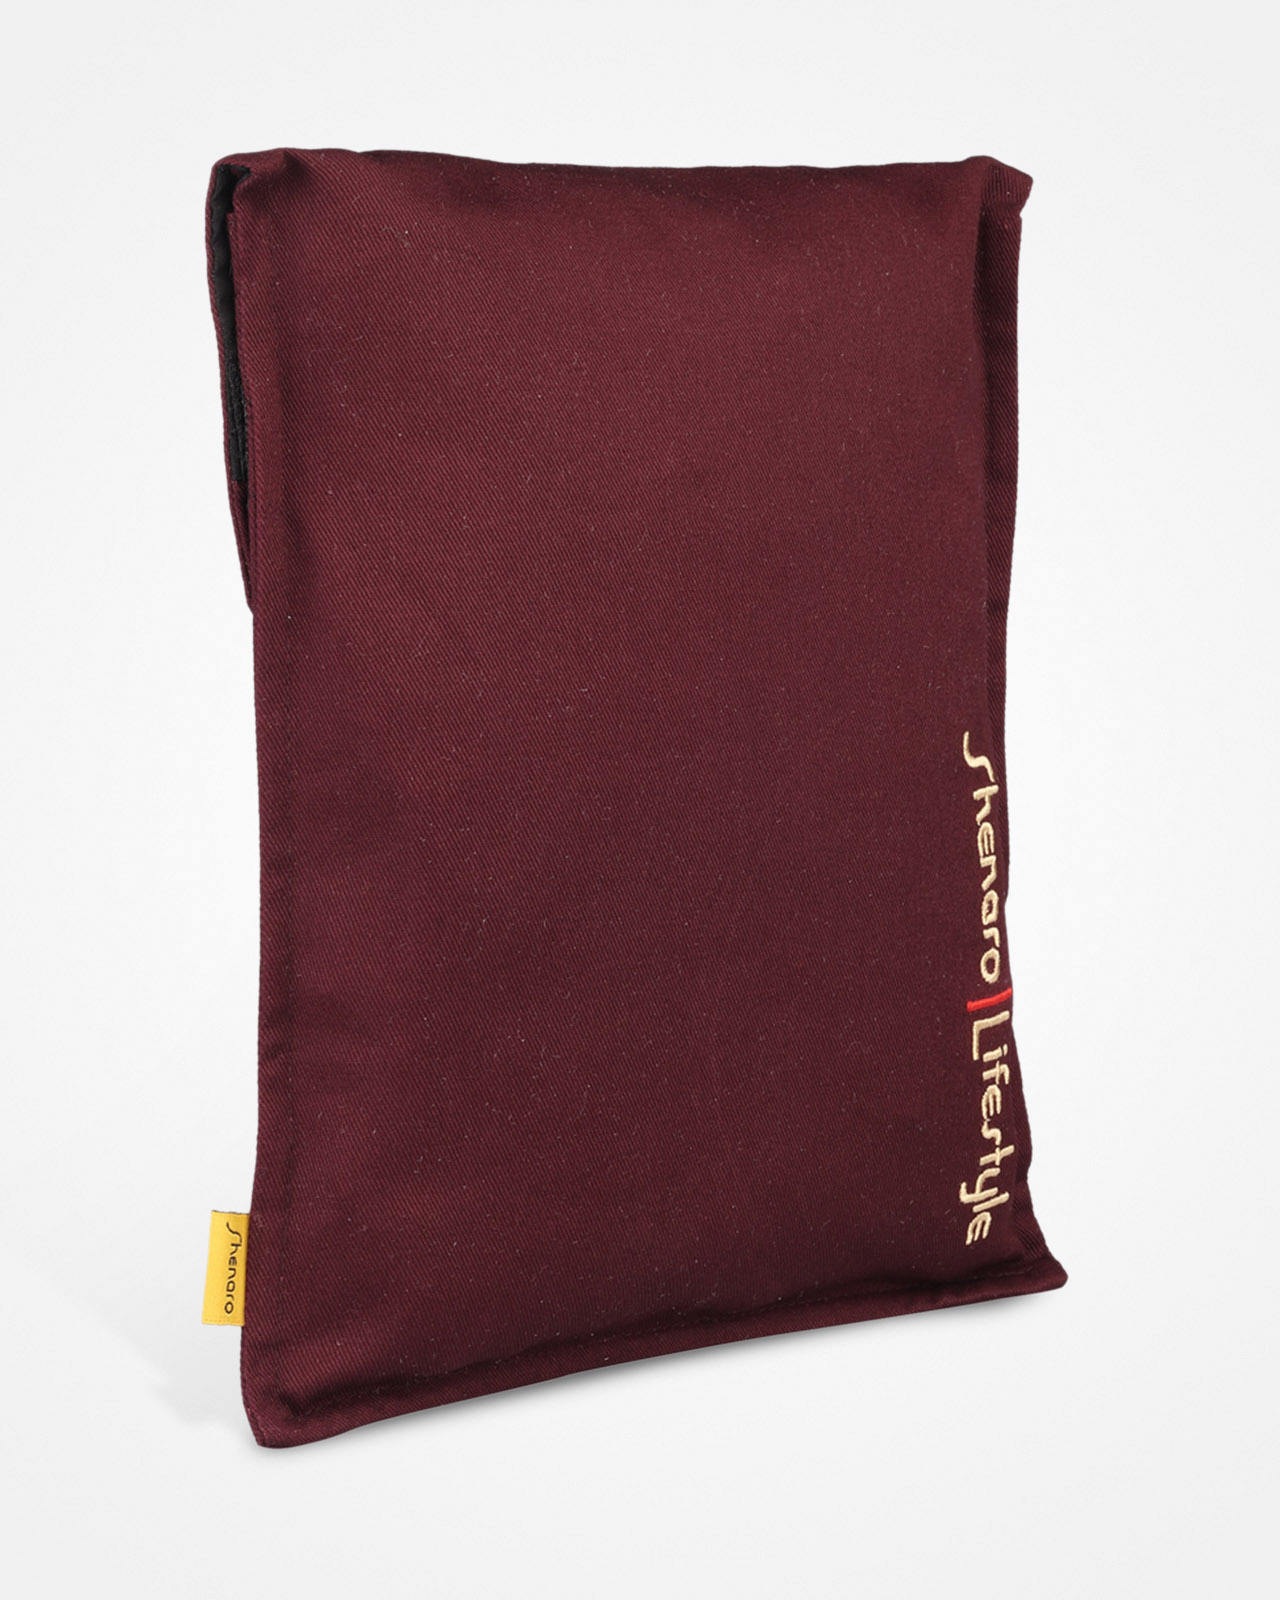 The-Wheatty-Bag-Chocolate-Maroon-in-Organic-Cotton-with-French-Lavender-Chocolate-Maroon-Color-Wheatty-Bag-for-Stress-Relief-Shenaro_Lifestyle-WB-S20-CHOMO_001